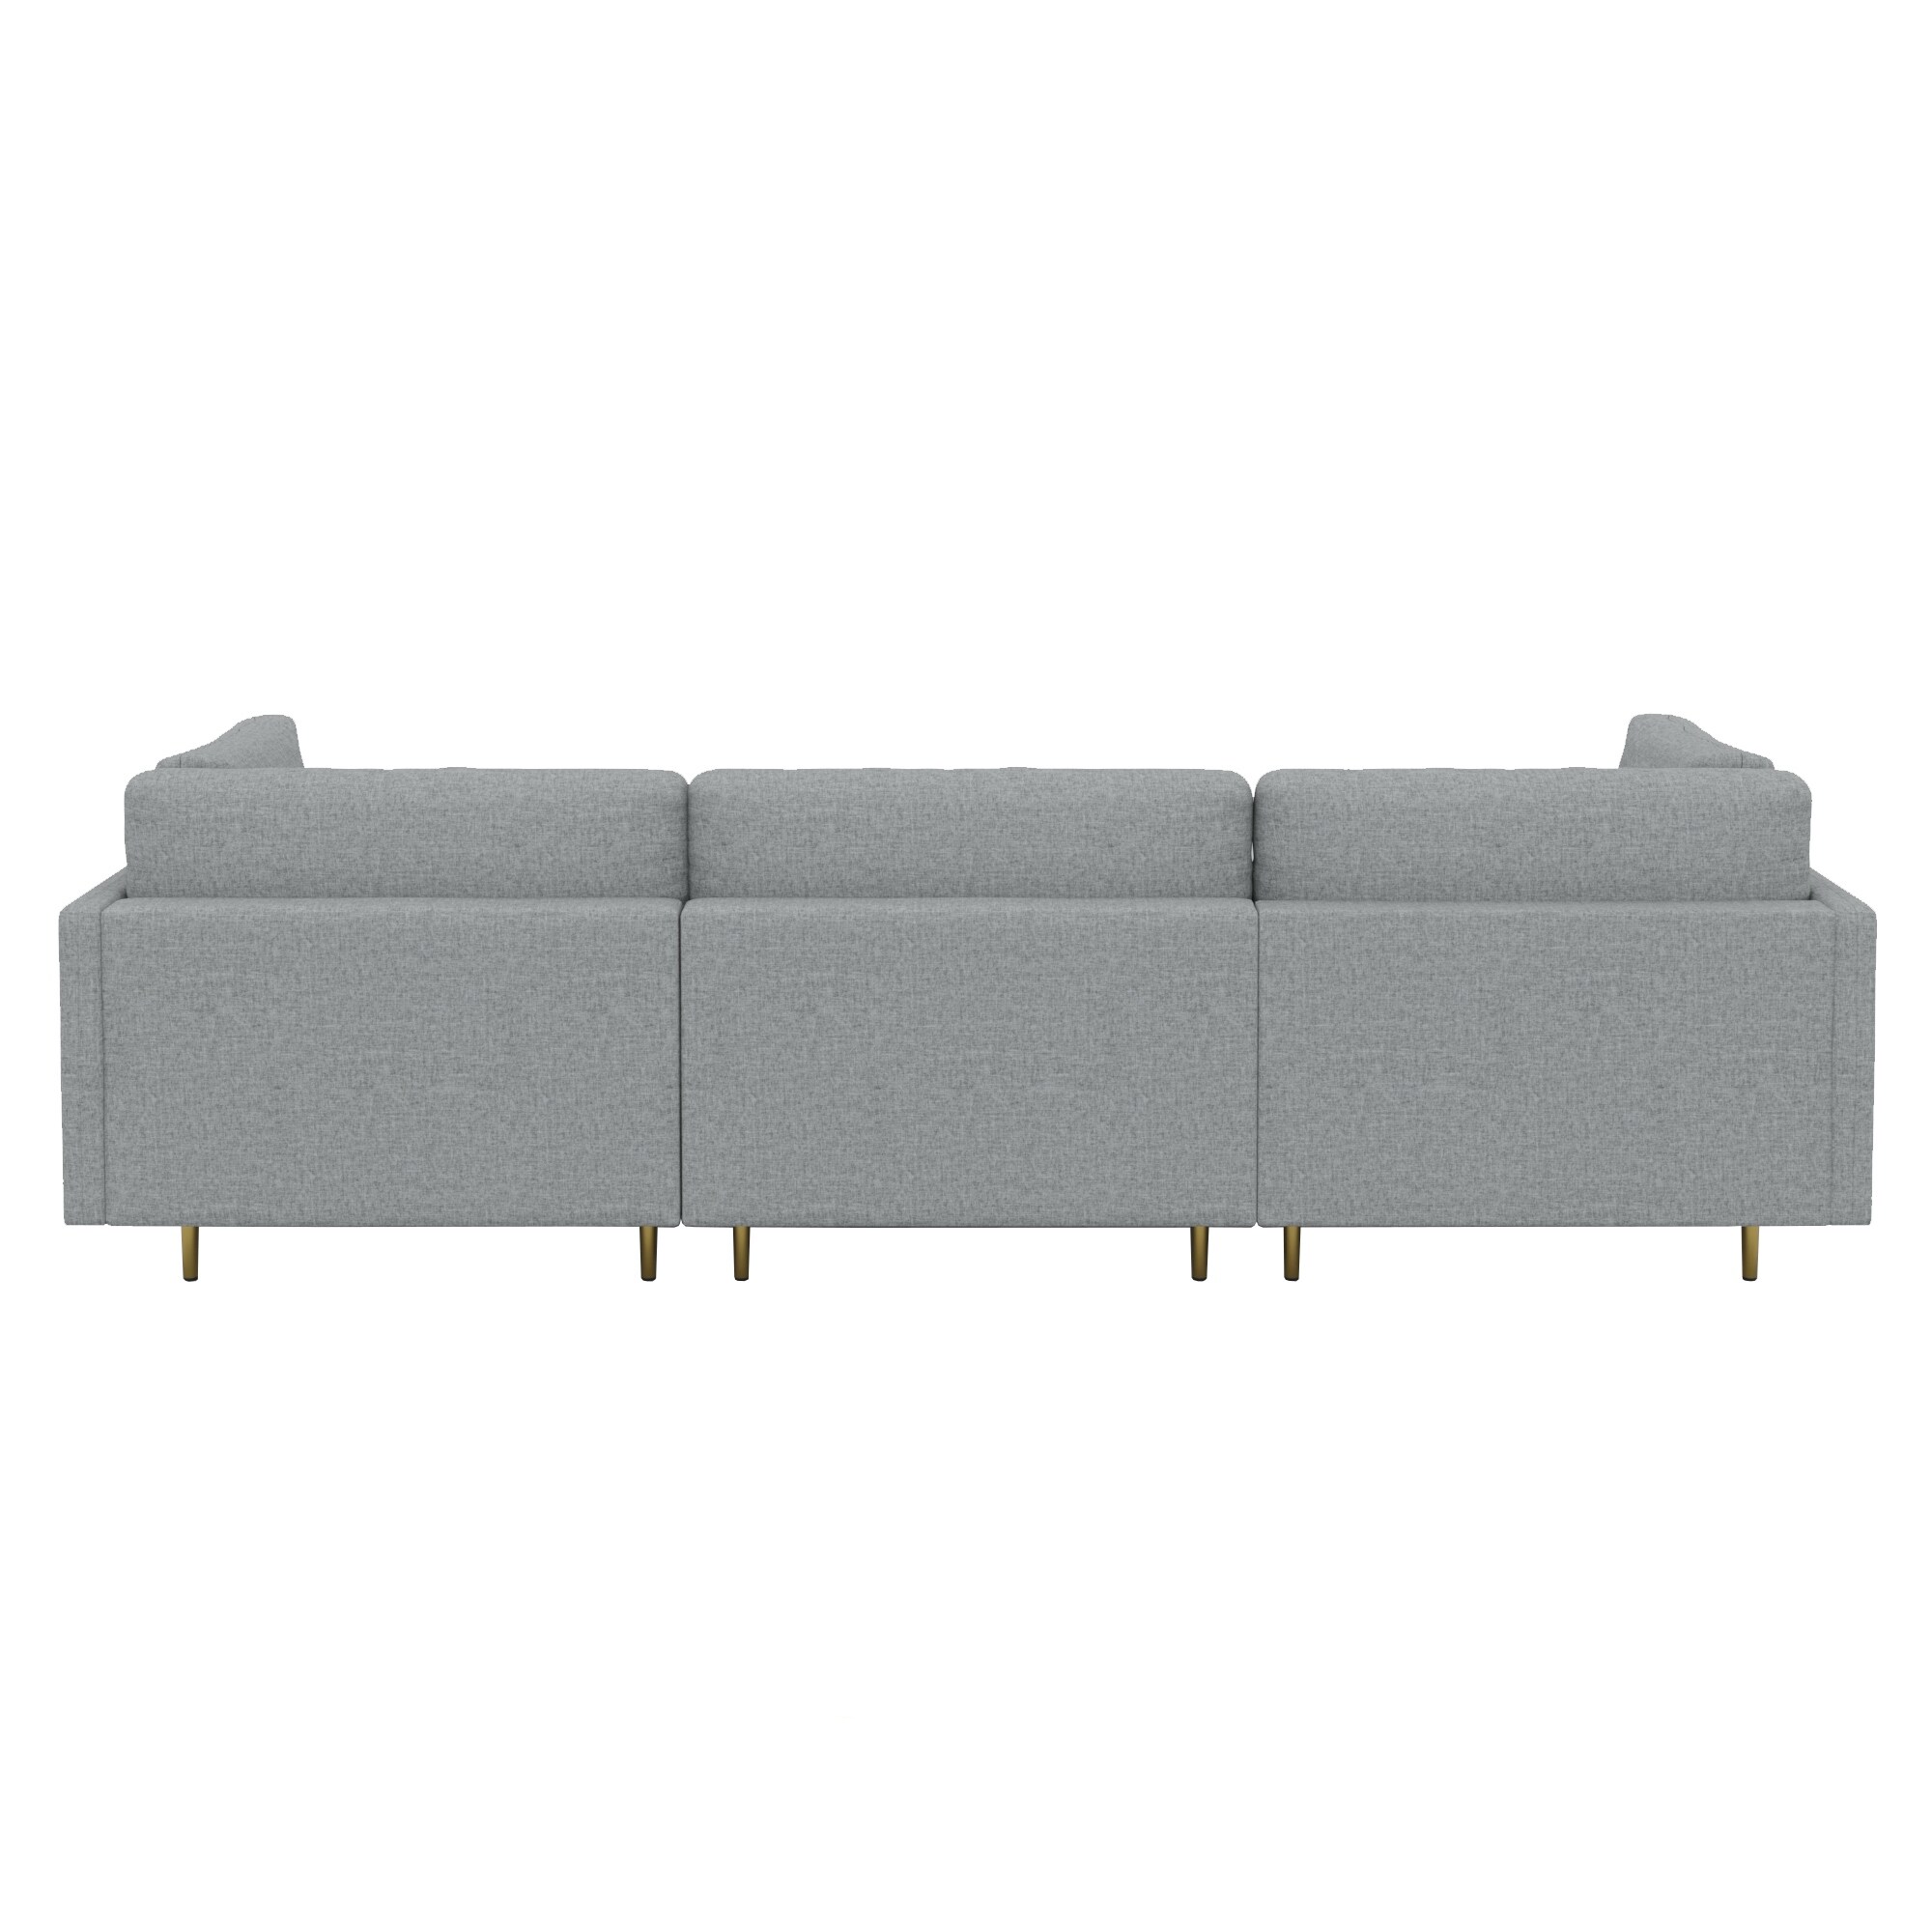 Modern 4 Pieces Cube Modular Sectional Sofa Sets - On Sale 